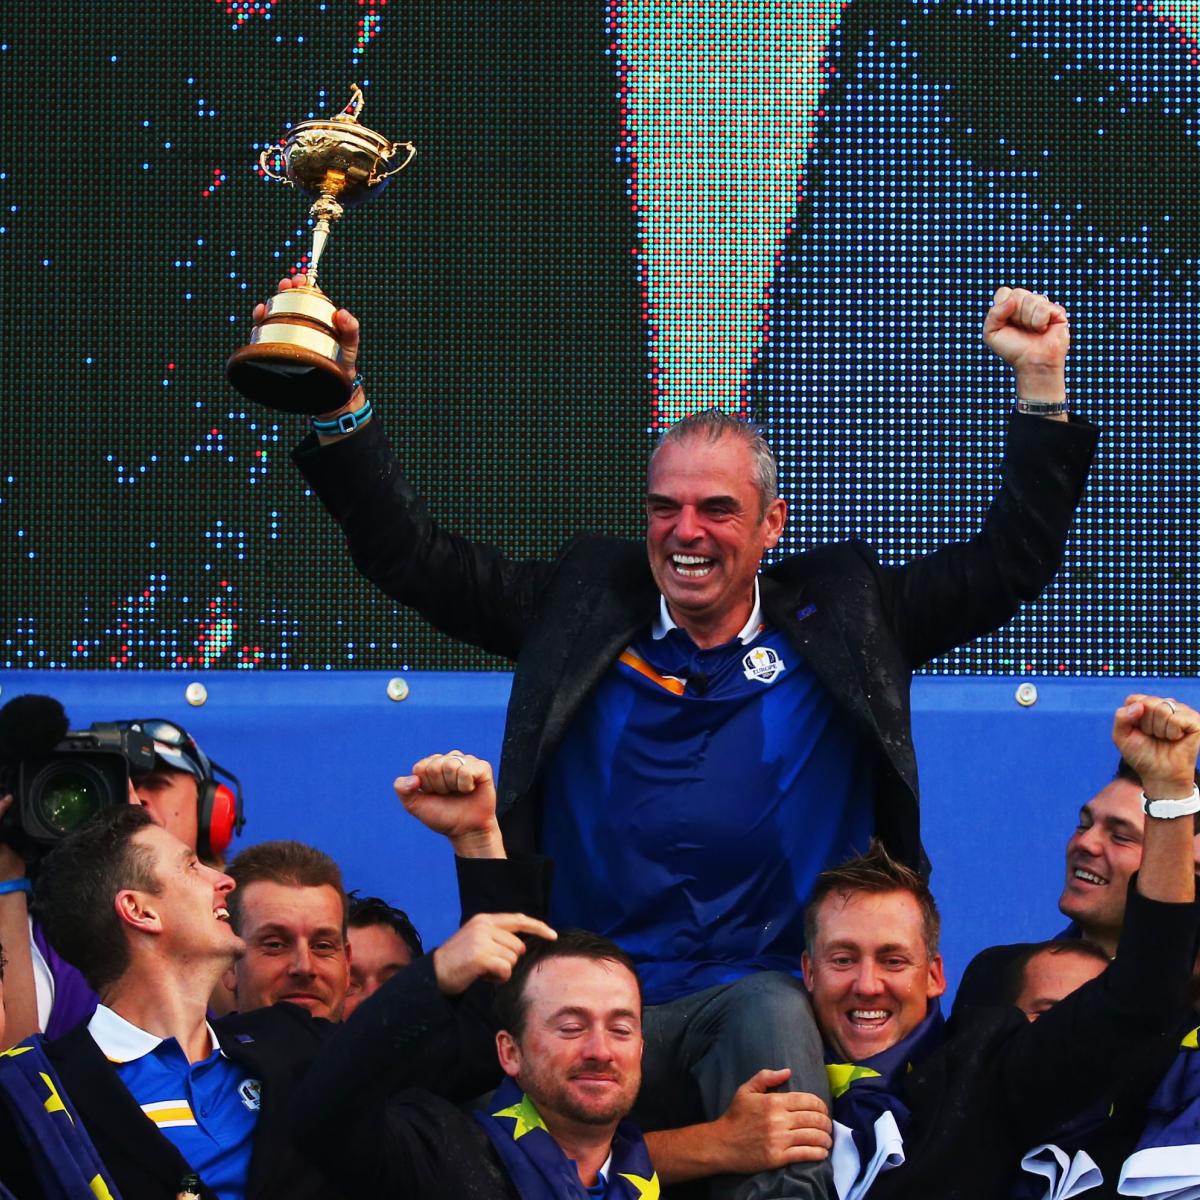 Ryder Cup 2014 Closing Ceremony Top Moments and Twitter Reaction